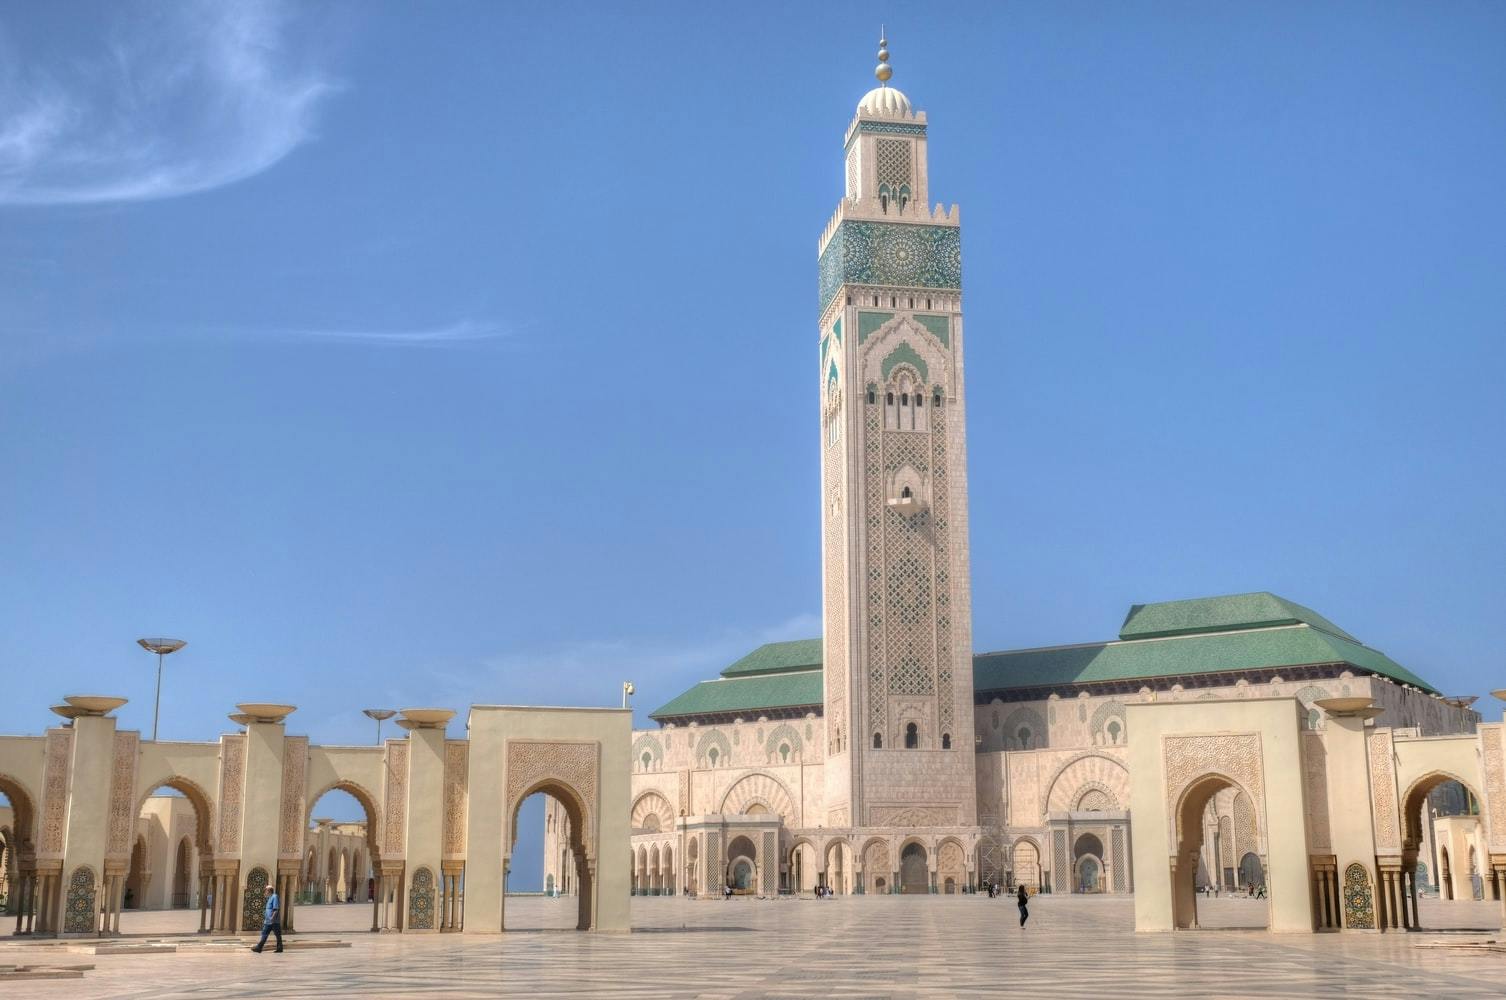 Casablanca private day trip with transfer from Marrakech